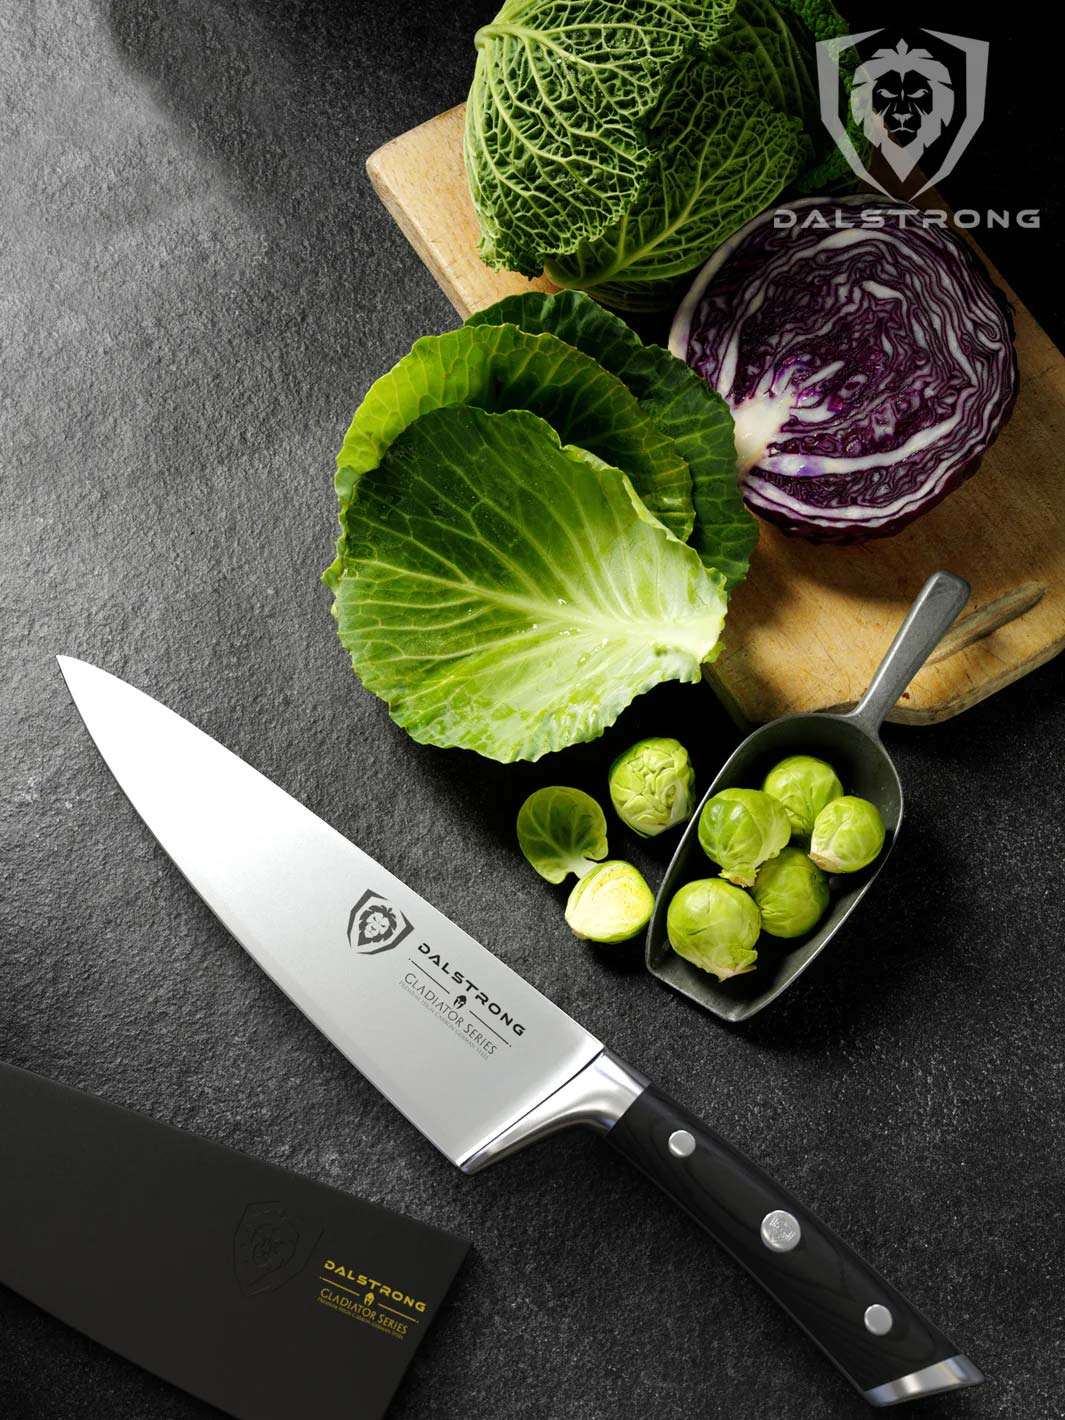 Dalstrong gladiator series 8 inch chef knife with black handle and sheath with three types of cabbage on a wooden board.